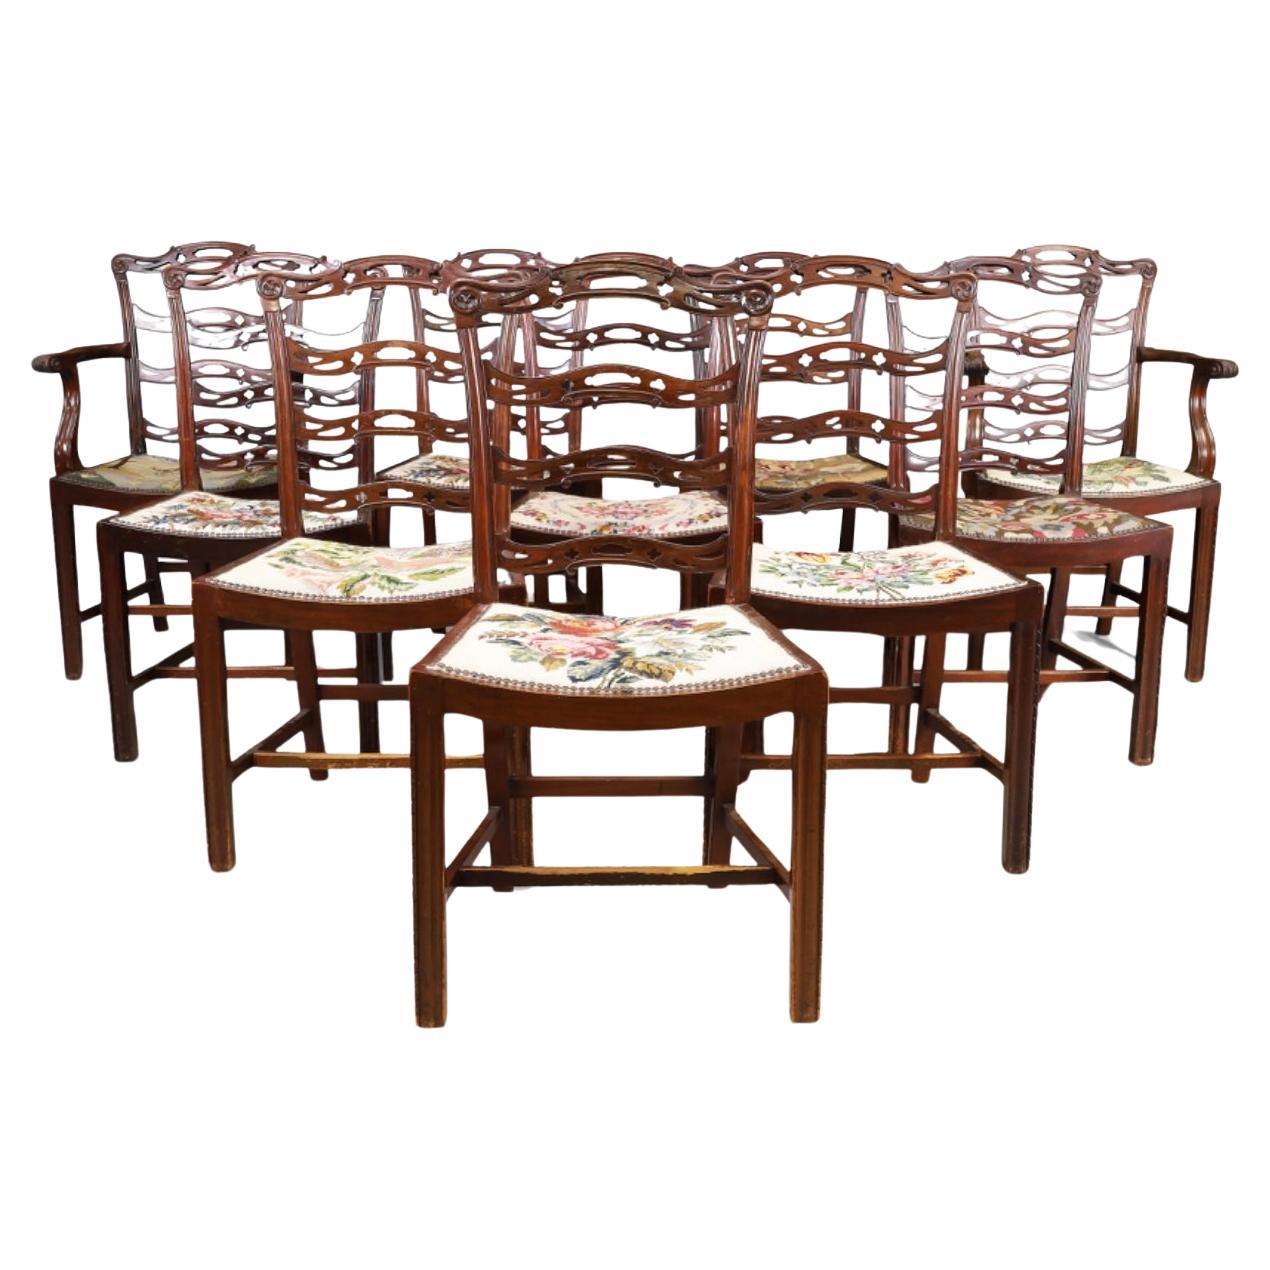 Stunning Edwardian Set Of Ten Dining Chairs , Chippindale Design For Sale